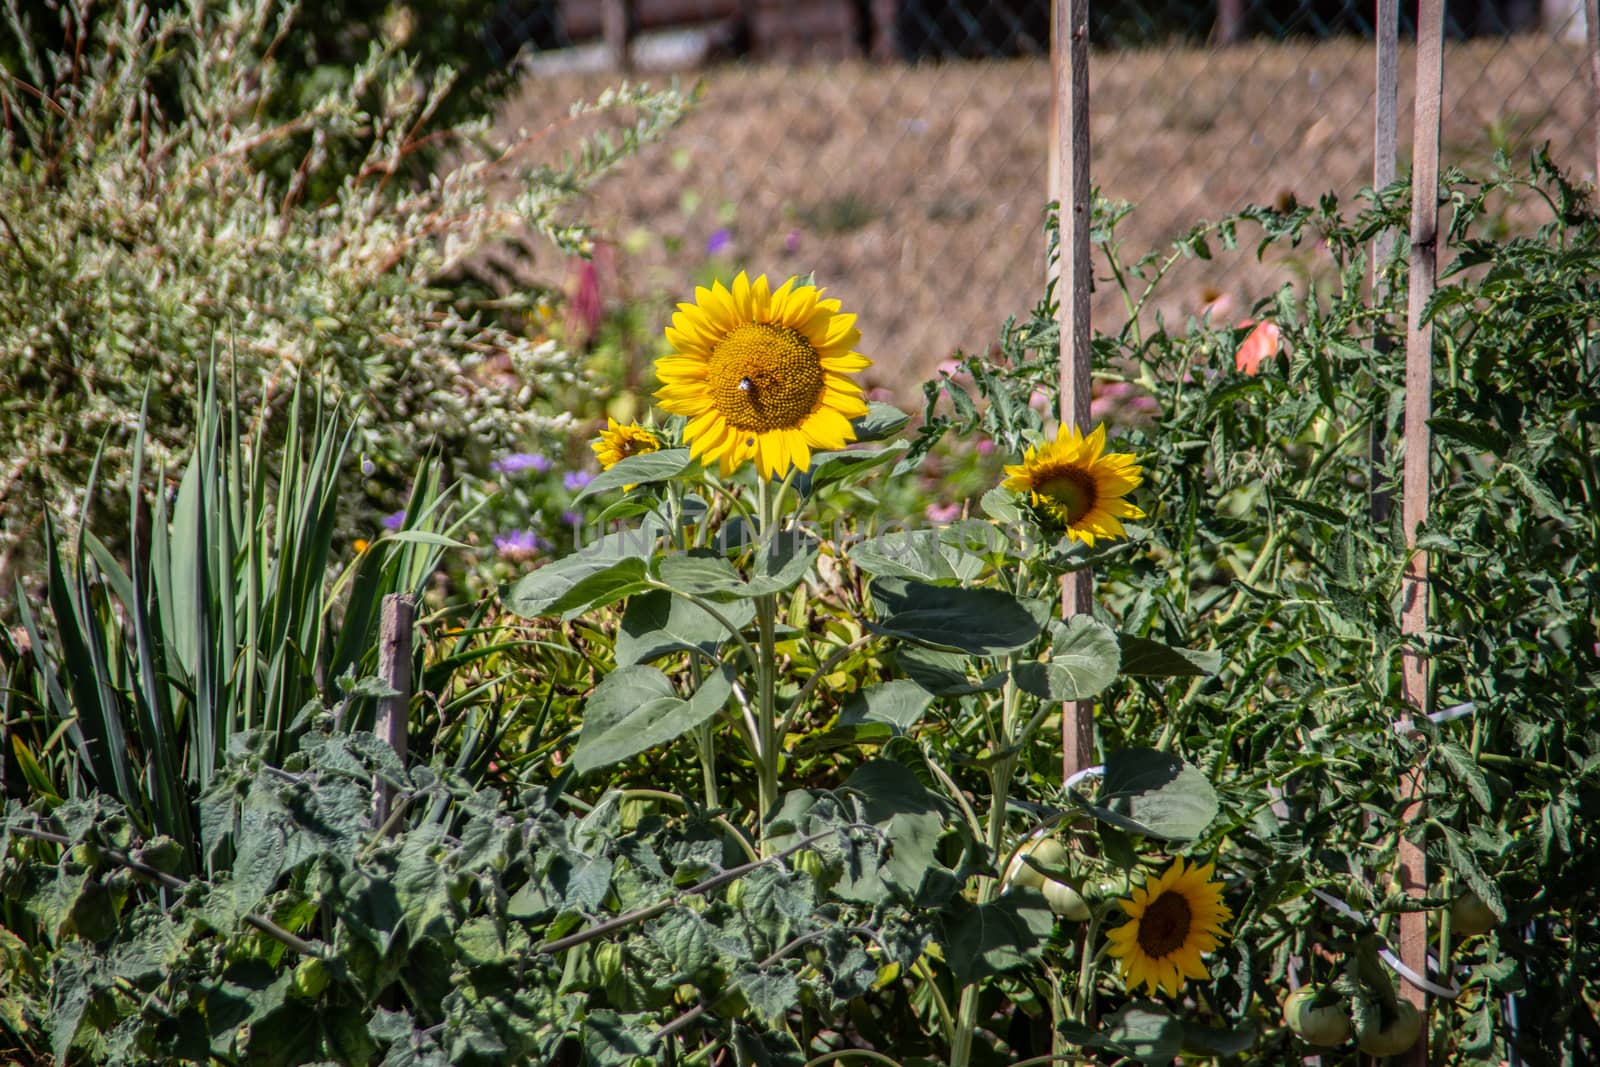 Allotment with herbaceous blooming sunflowers